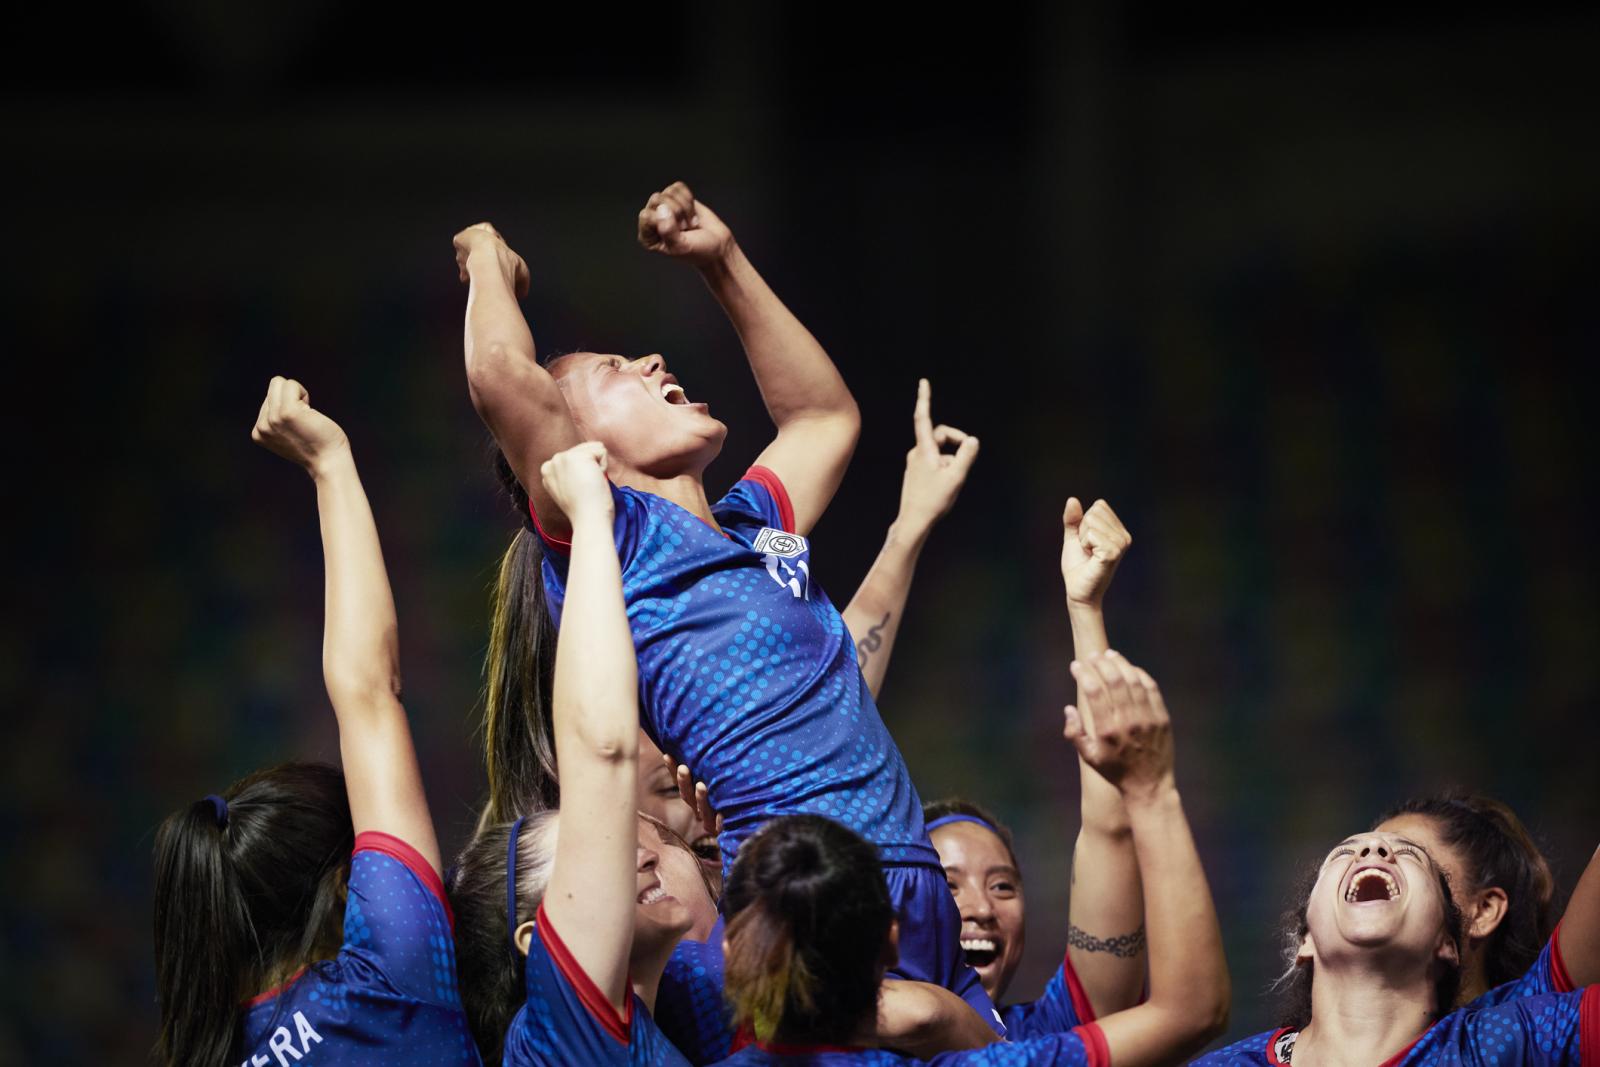 A group of female soccer players celebrate, lifting one player on their shoulders and throwing their arms in the air.